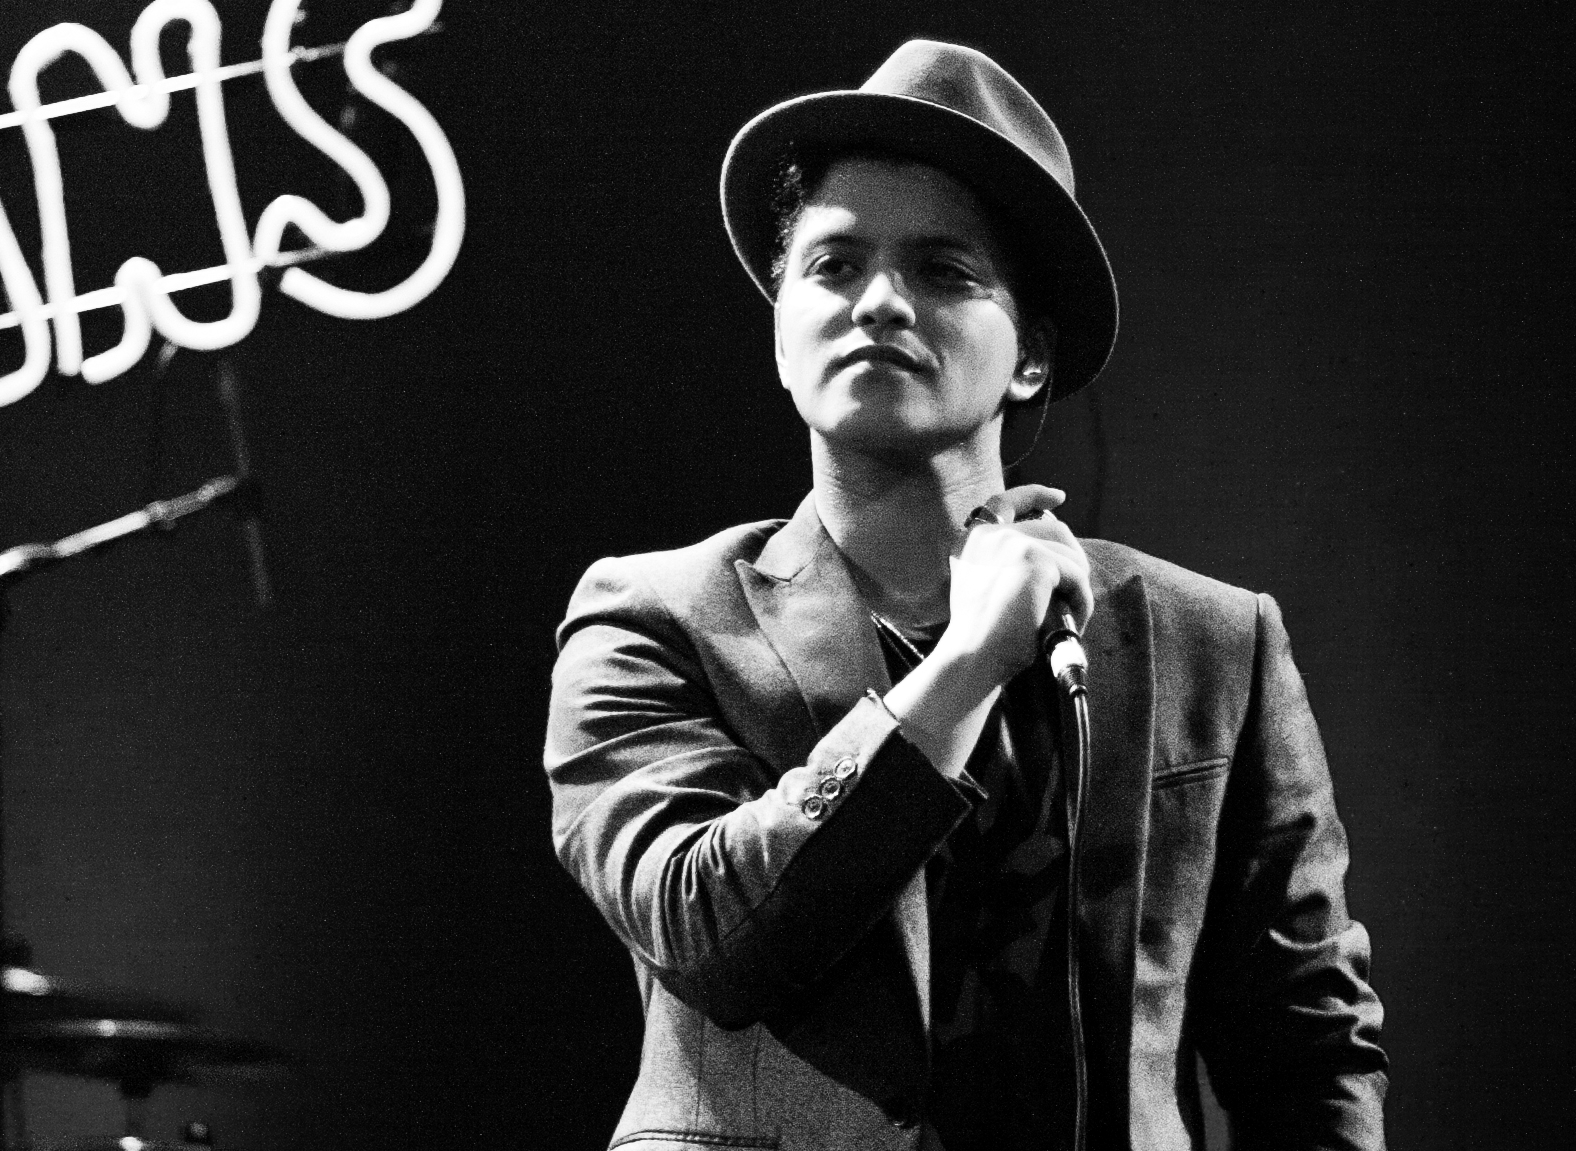 Bruno Mars Announces New Single, Album with Anderson .Paak